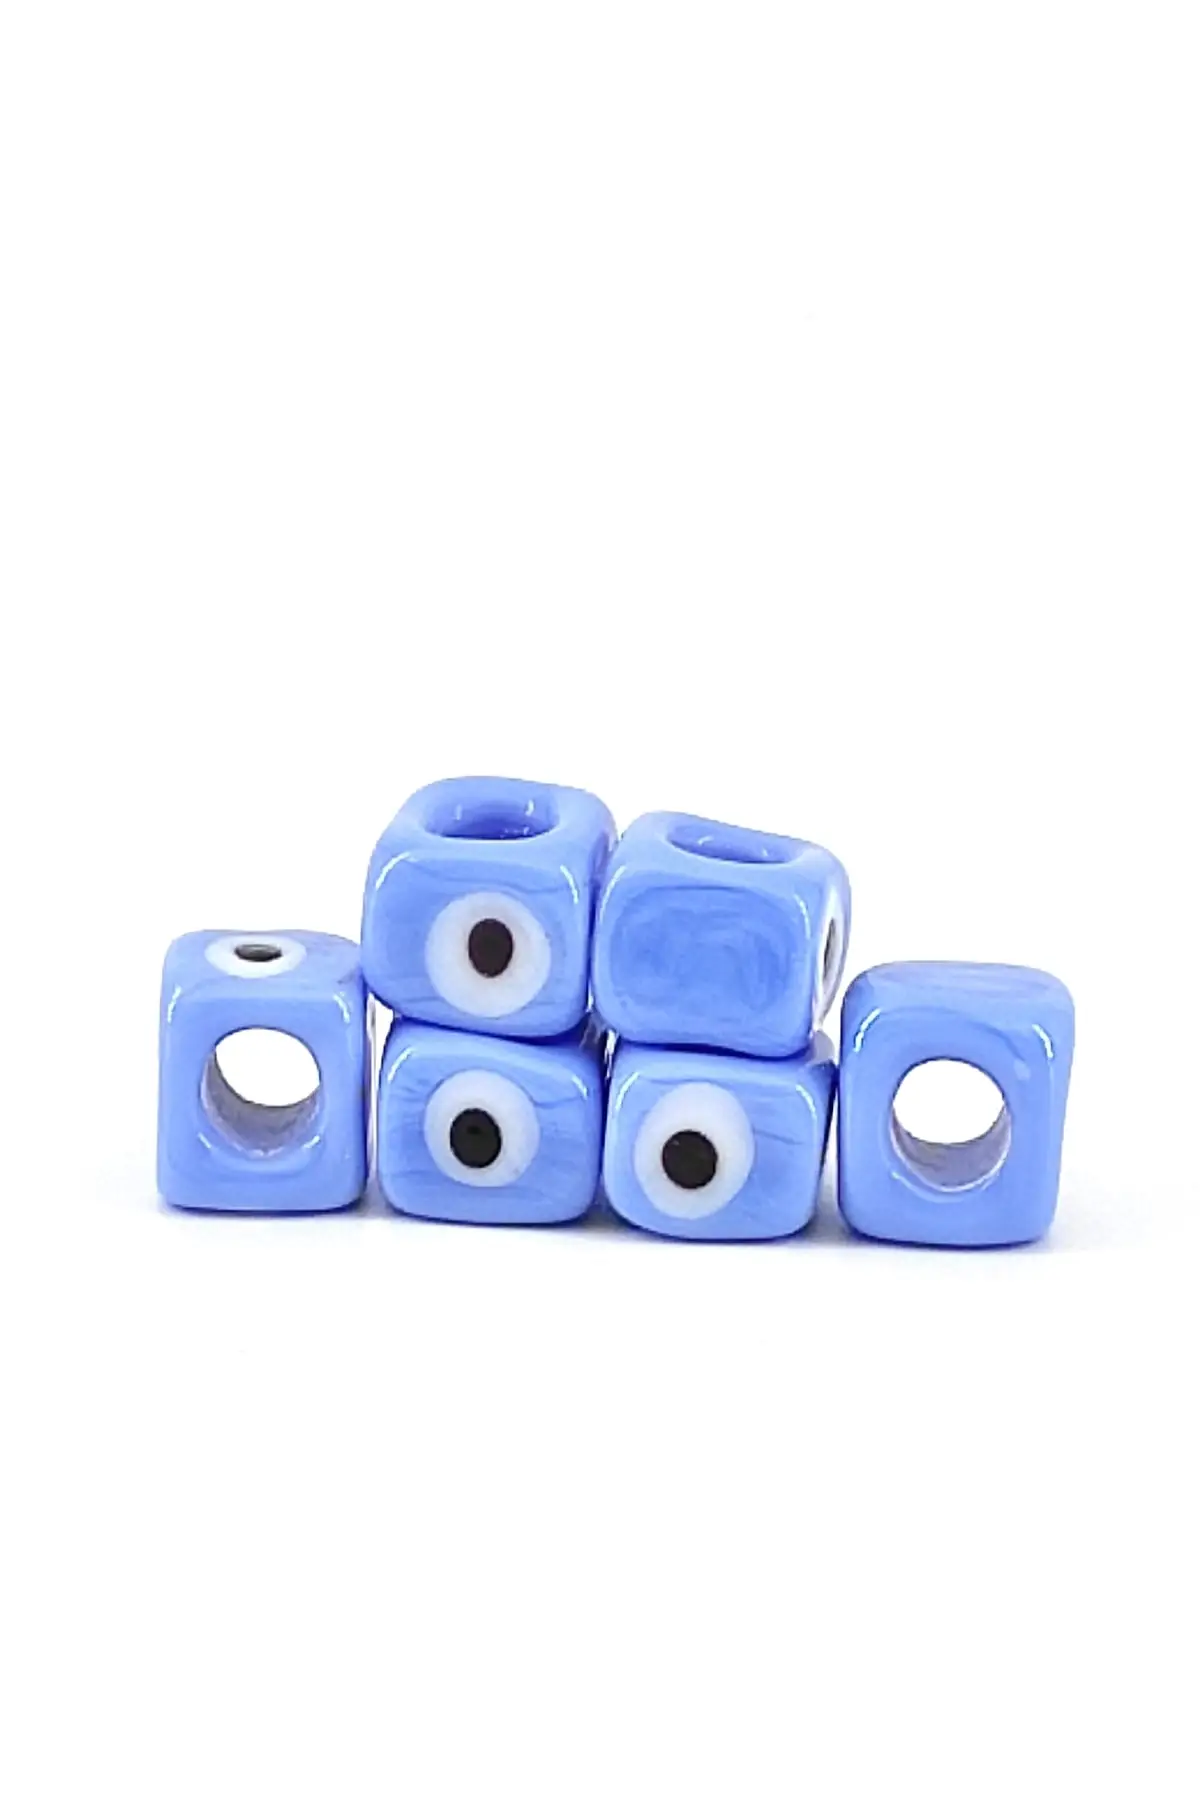 

Handmade Lilac Color Murano Eyes Square Glass Jewelry Bead 5 Pcs Beads Hobby Supplies & Entertainment Life